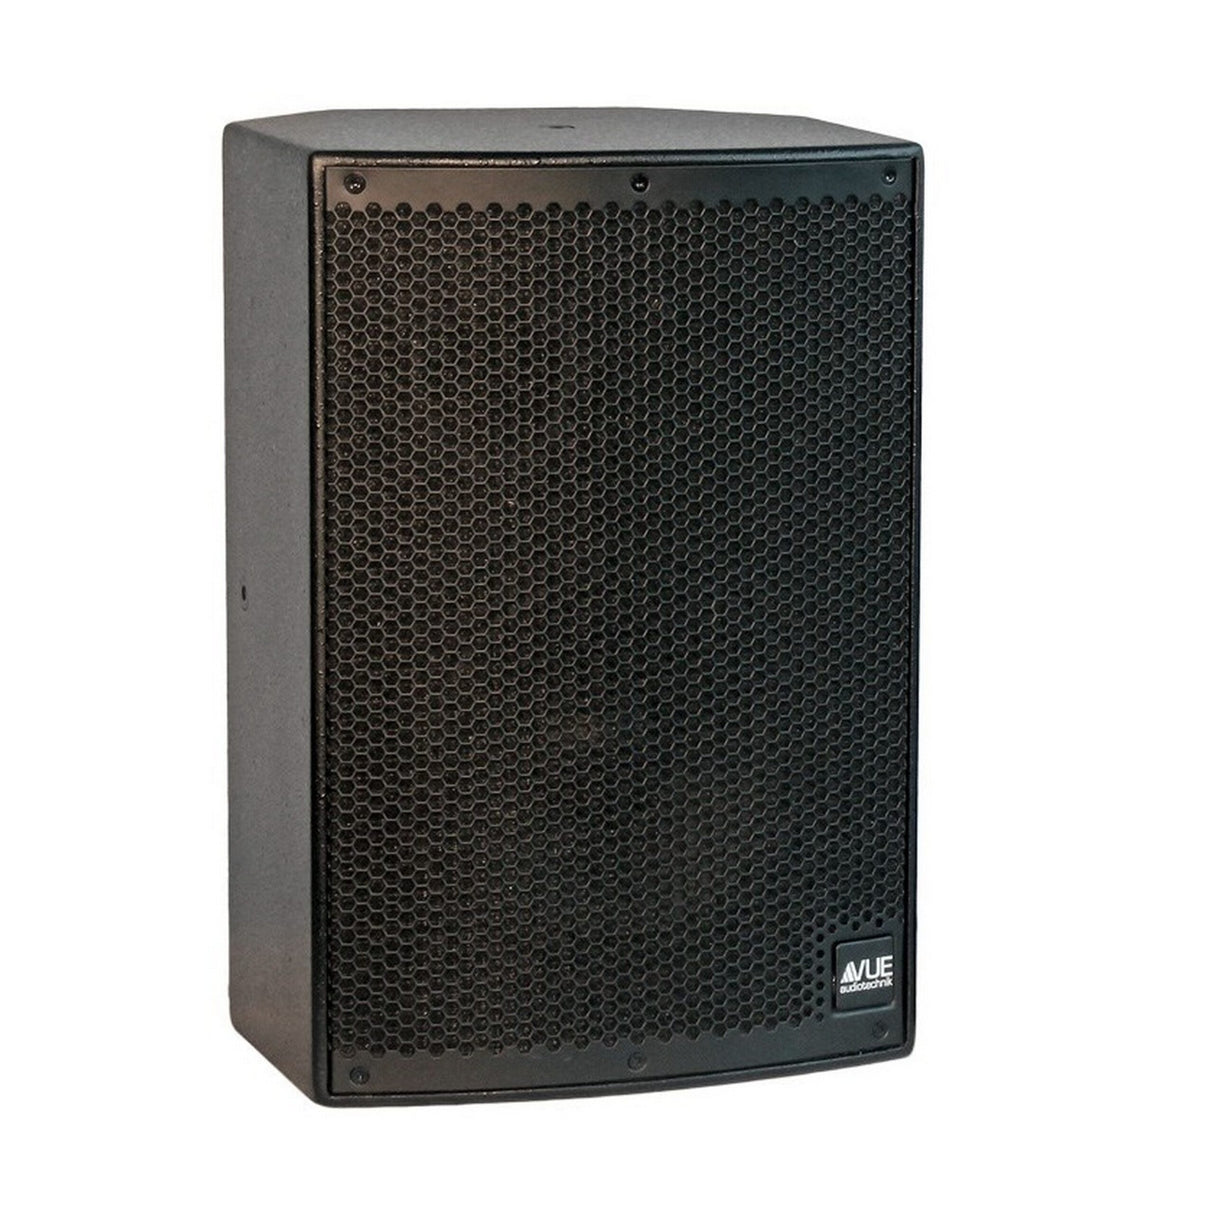 VUE Audiotechnik i-8a Two-Way Foreground Powered Loudspeaker